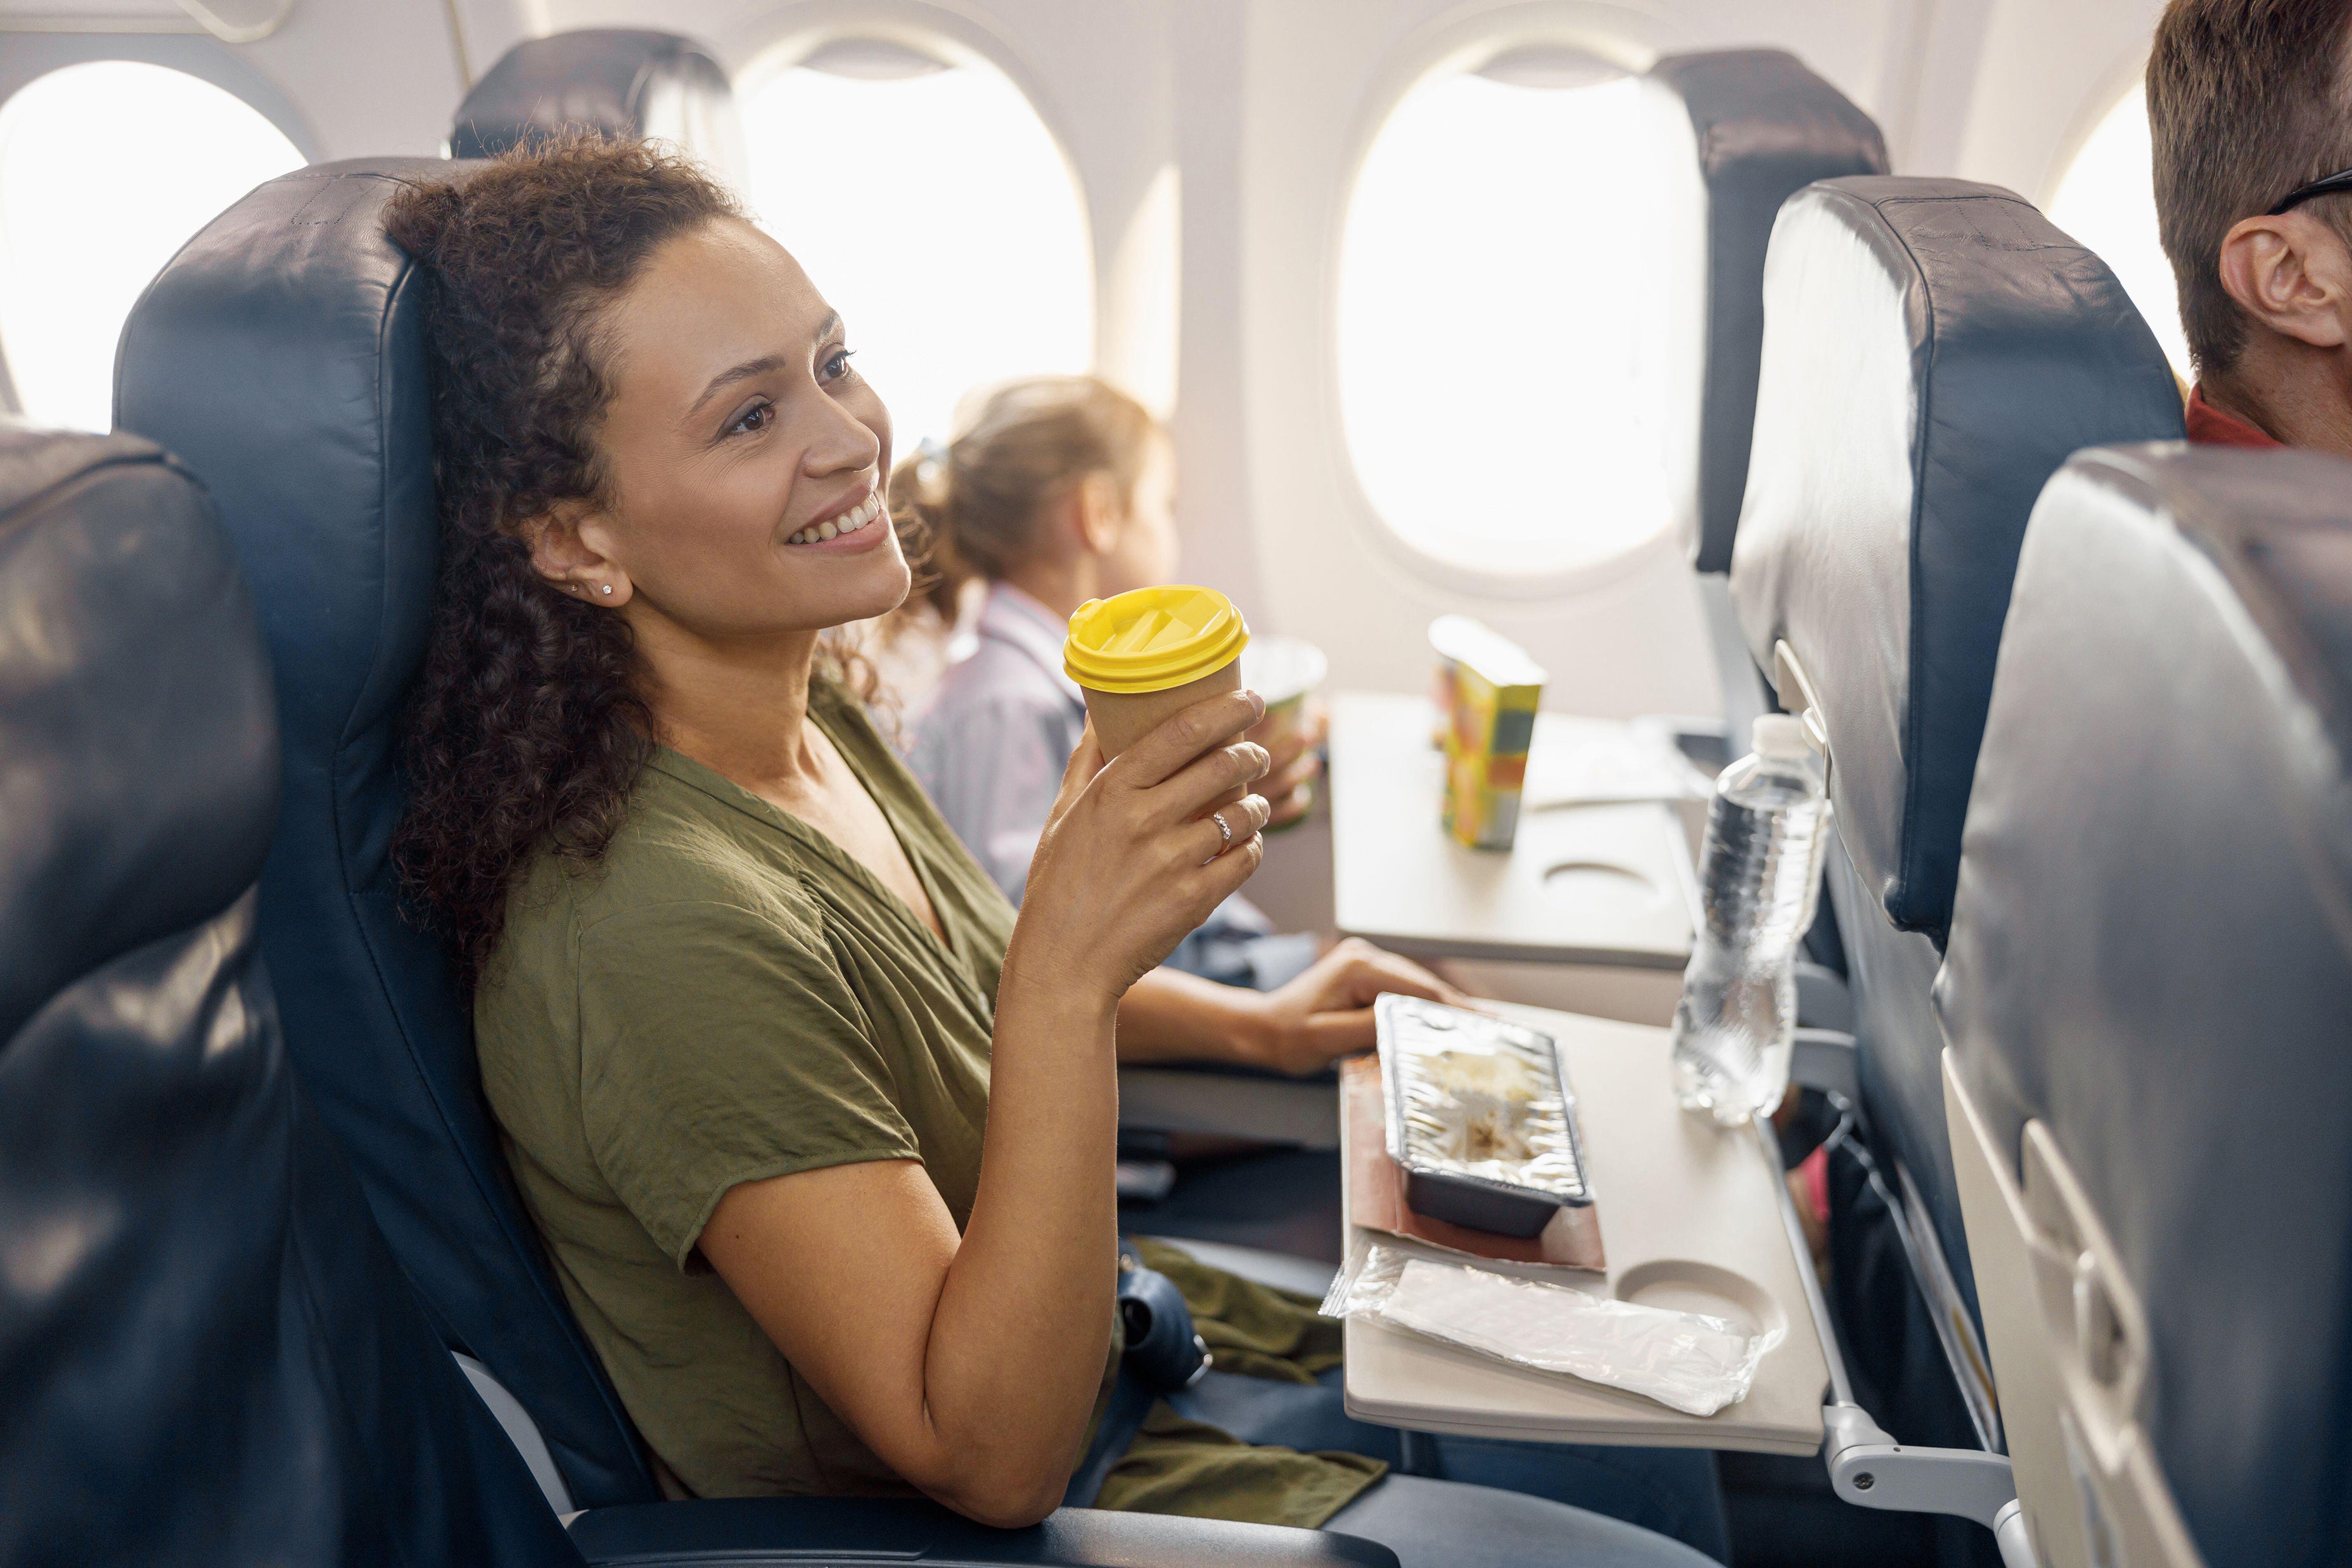 A lady drinking a hot beverage on a flight